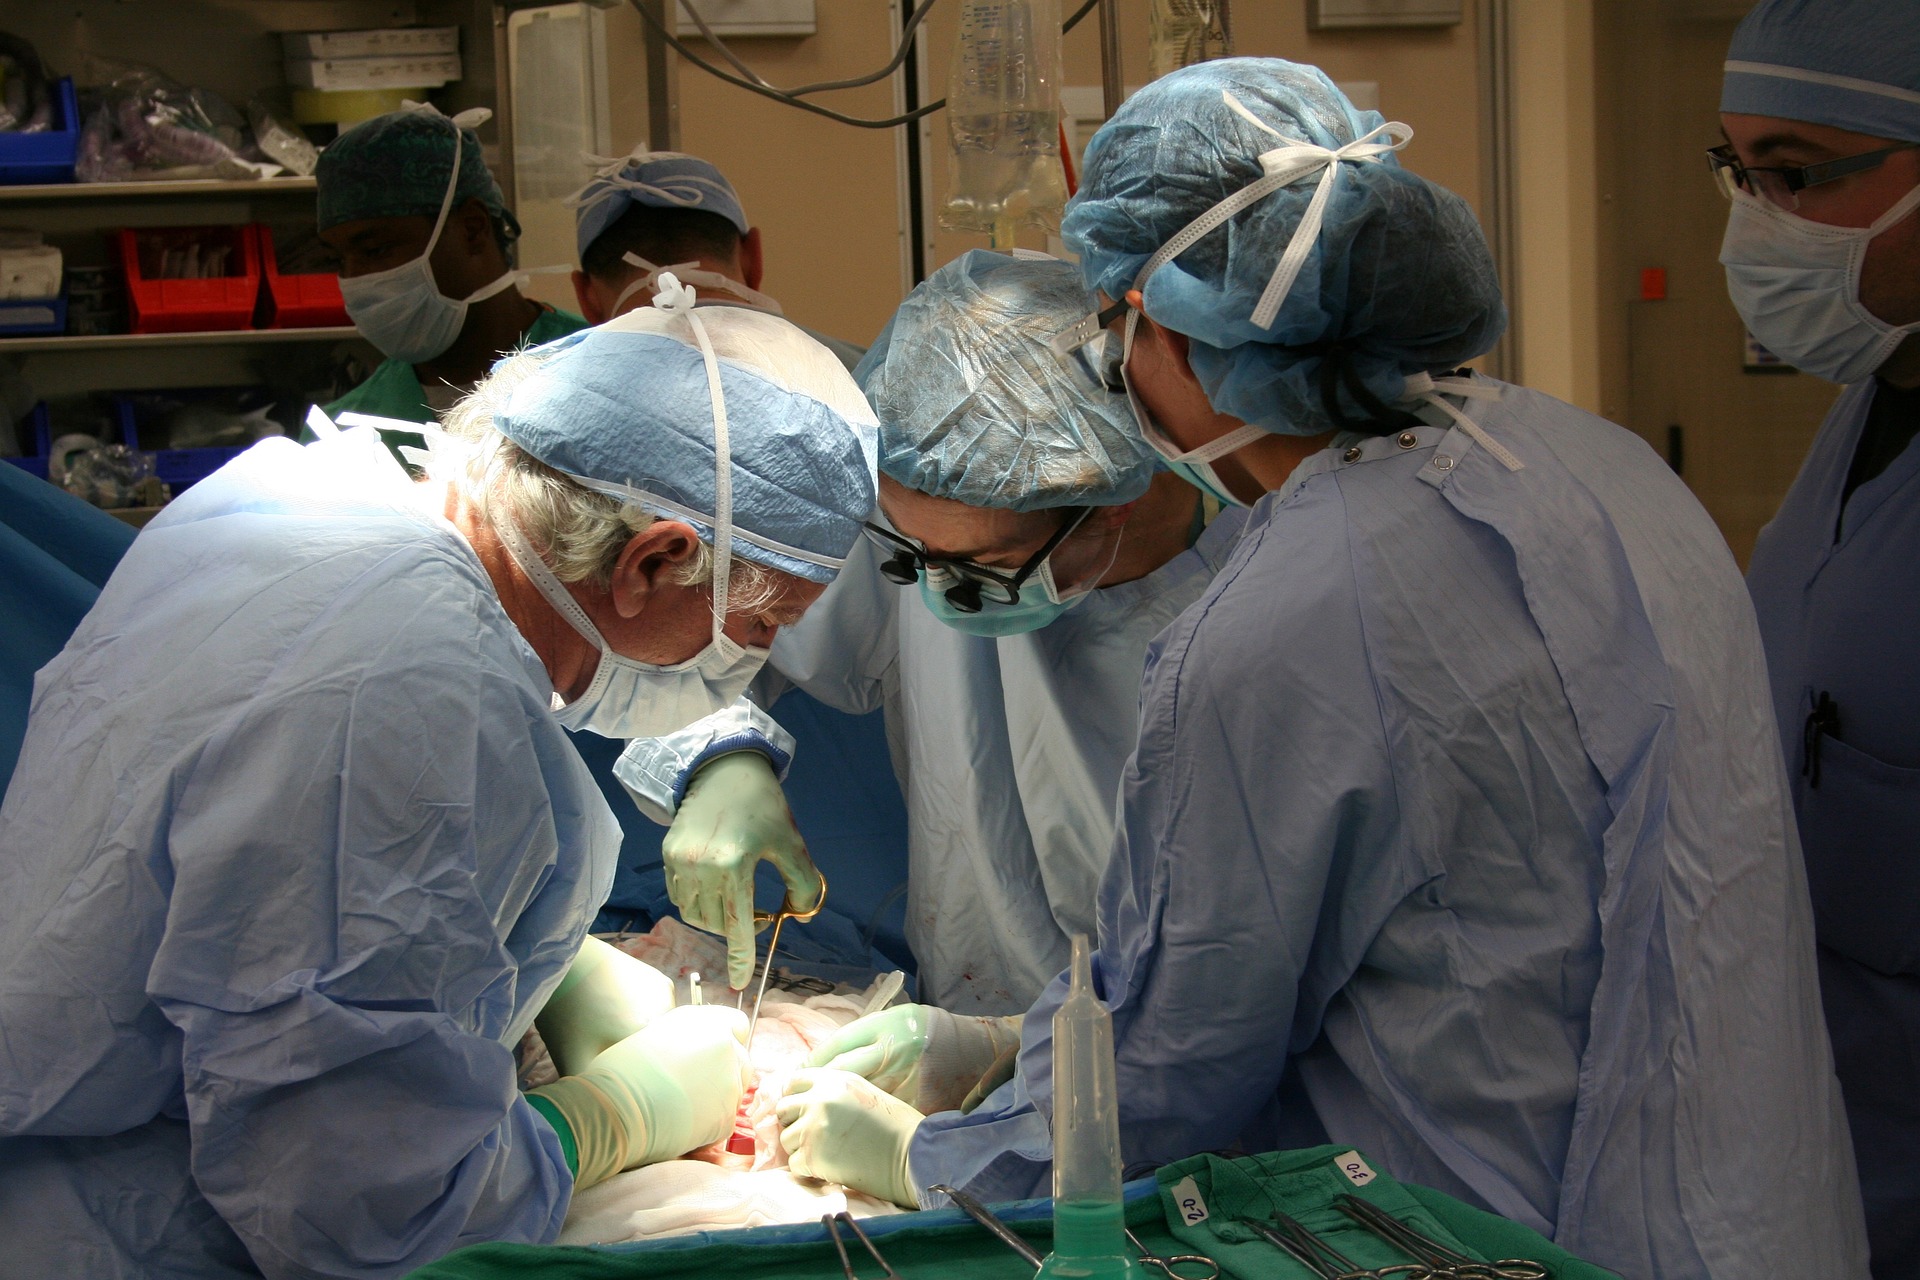 Surgery Prayer - For Healing In The Operating Room